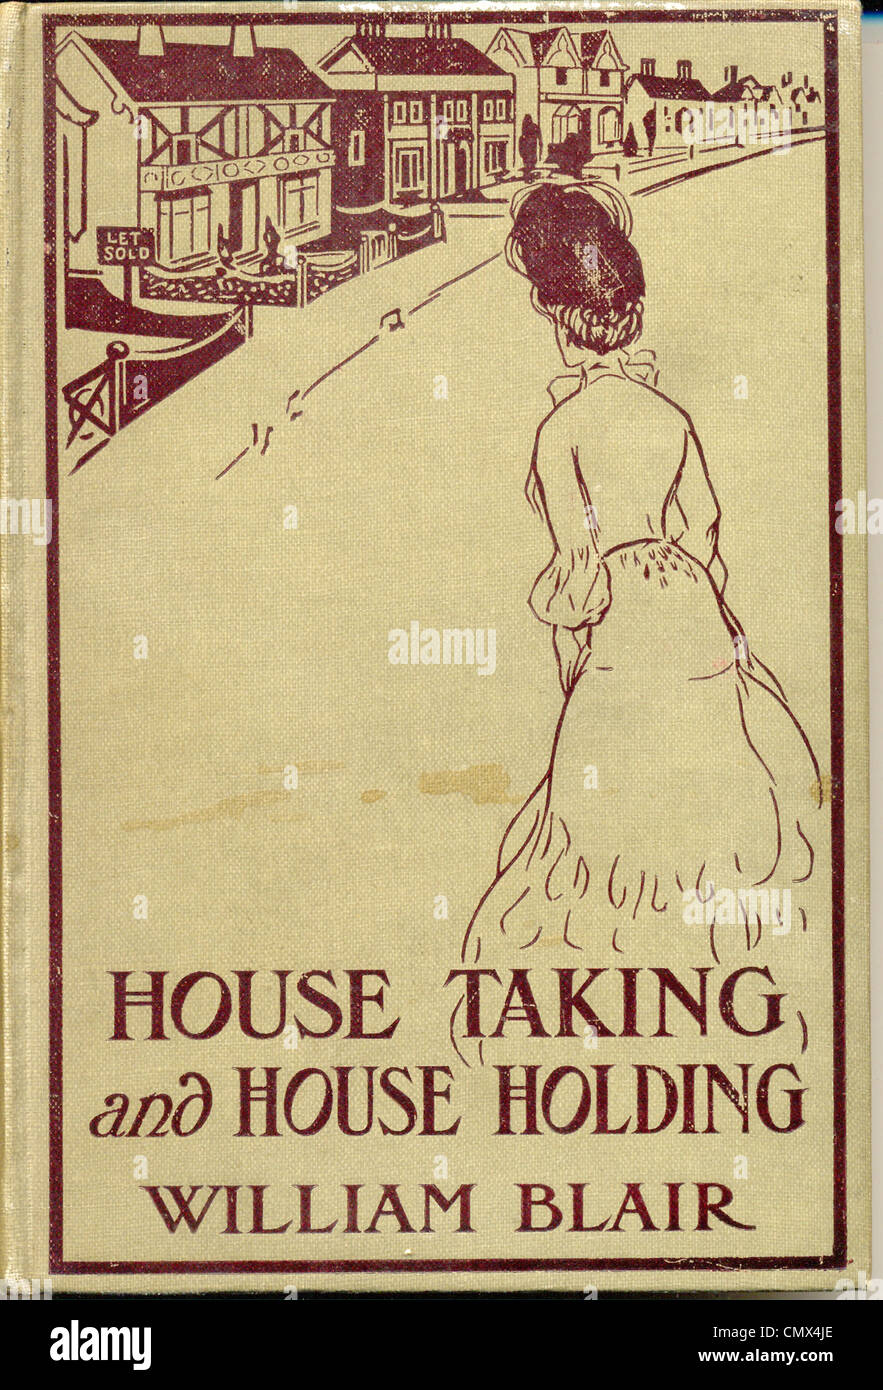 Cover for book titled House Taking and House Holding by William Blair Stock Photo